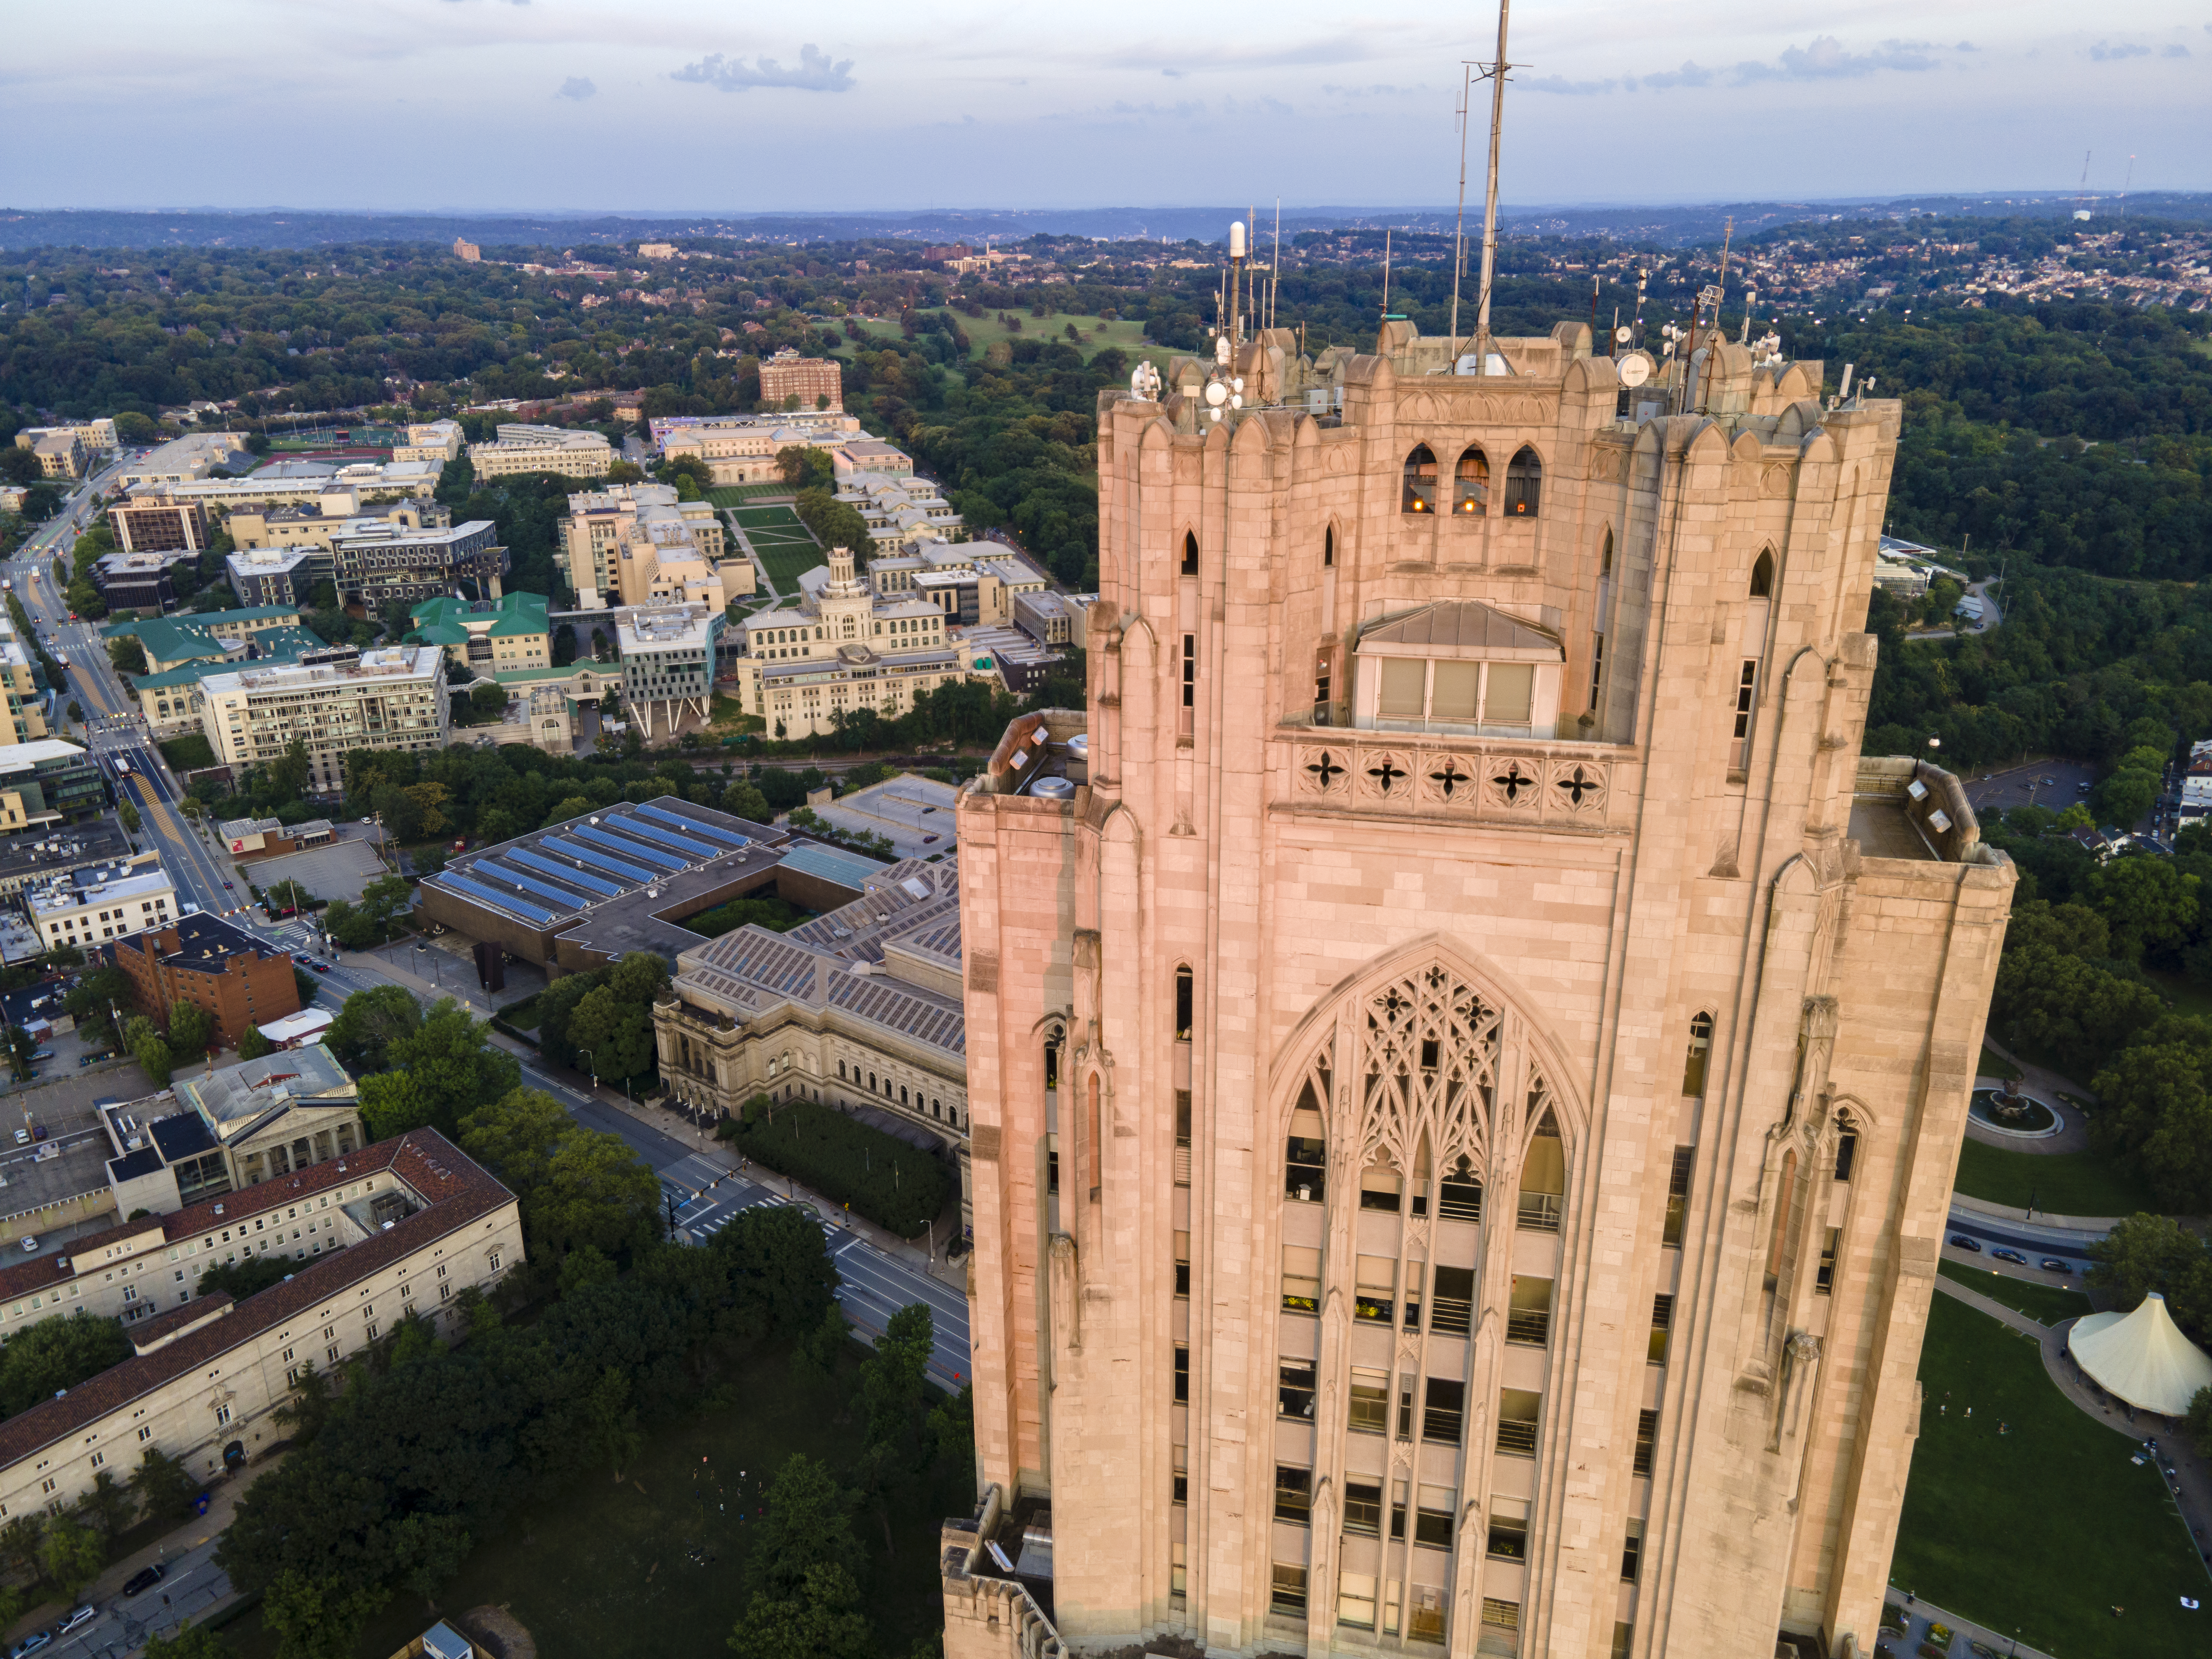 Bird's-eye view of Oakland featuring the Cathedral of Learning